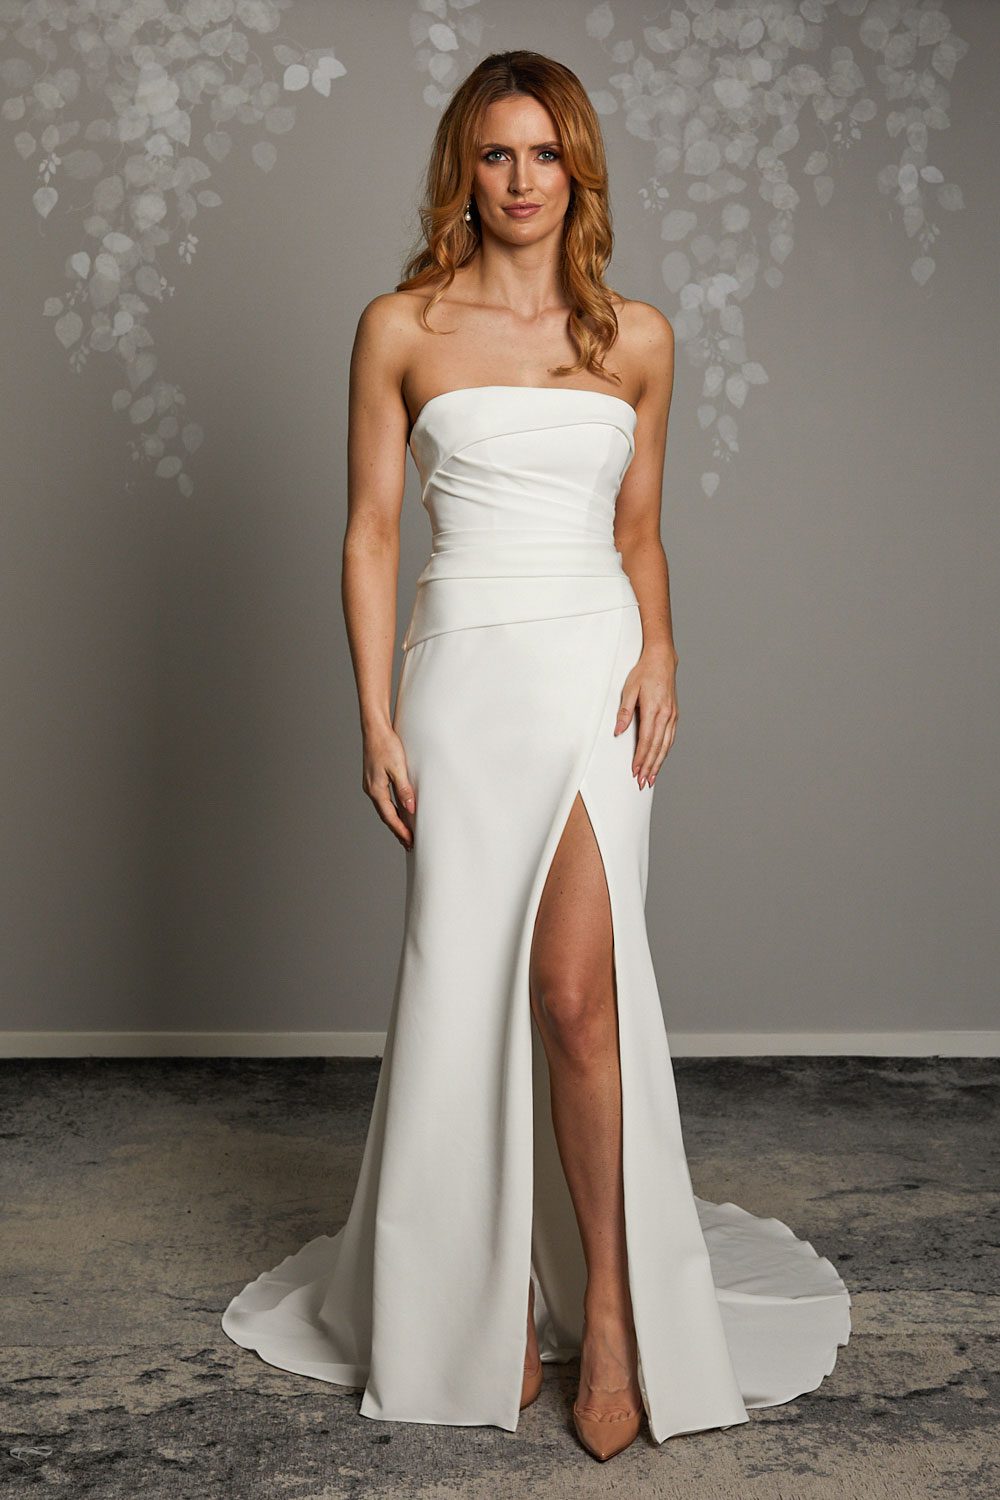 Mara, a minimalist bridal gown with stunning silhouette. Strapless wedding dress in heavyweight Japanese stretch polyester with a seductive split. From Vinka Design, Auckland, New Zealand